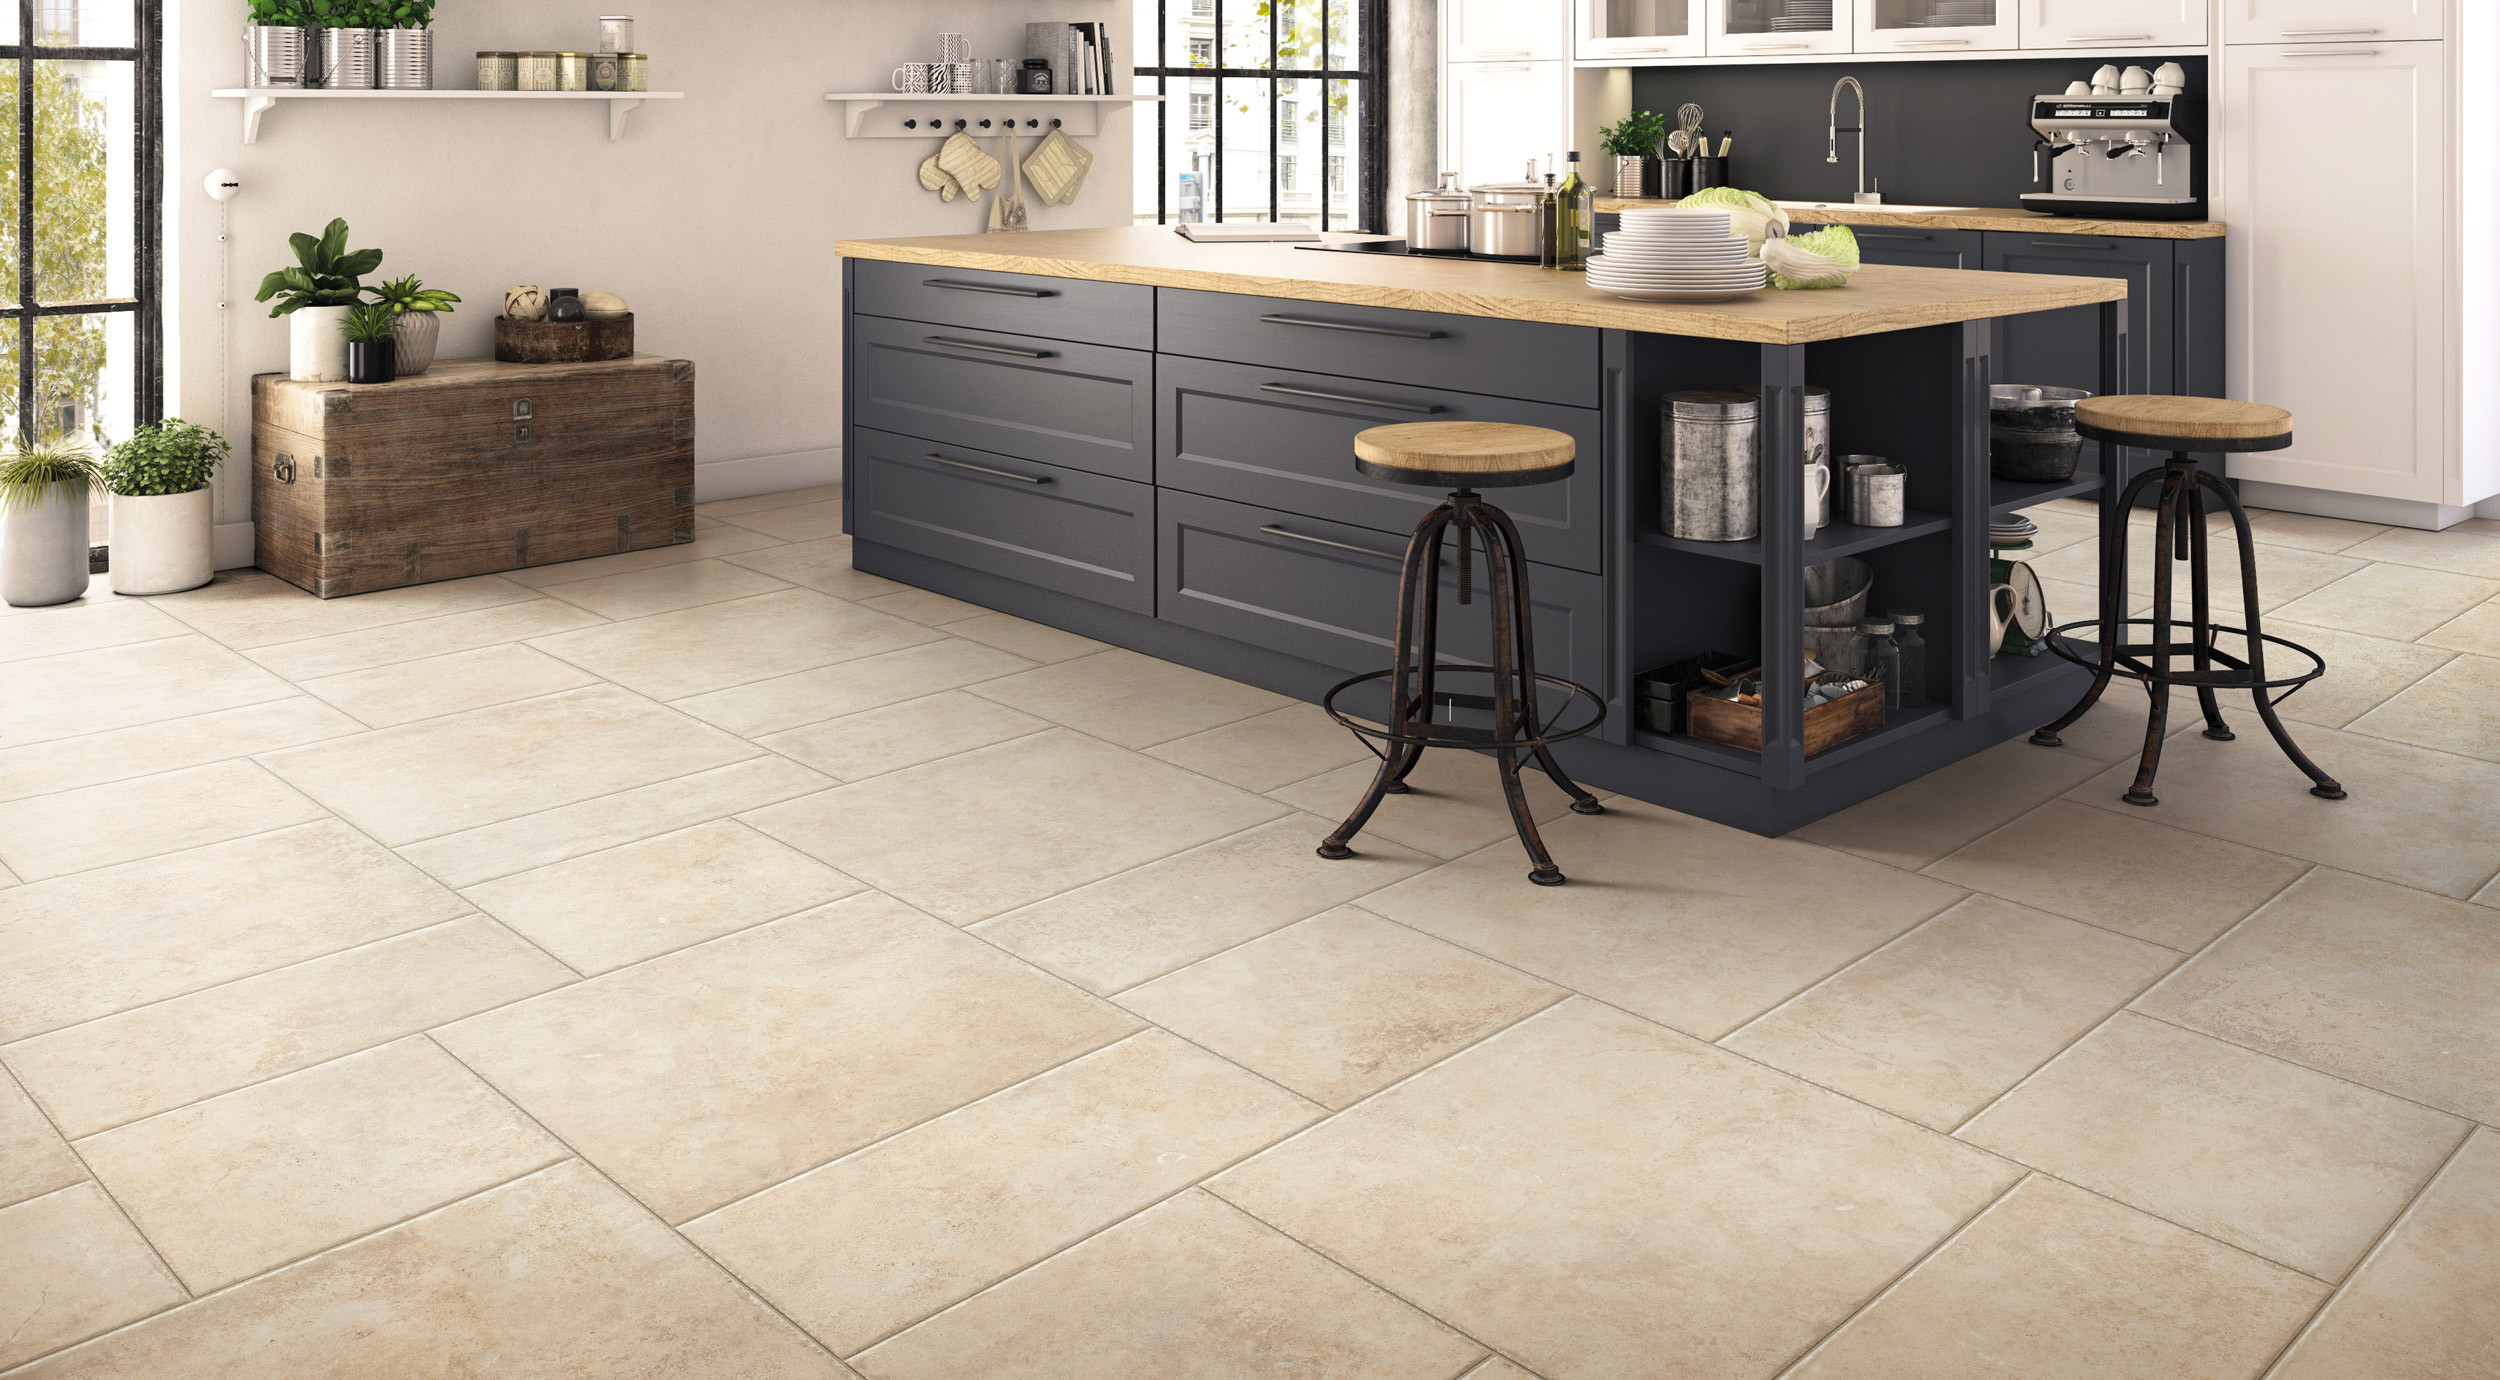 Cream porcelain stoneware floor and wall tiles Terre d'Otranto Naturale R9 series by Ceramica Rondine
